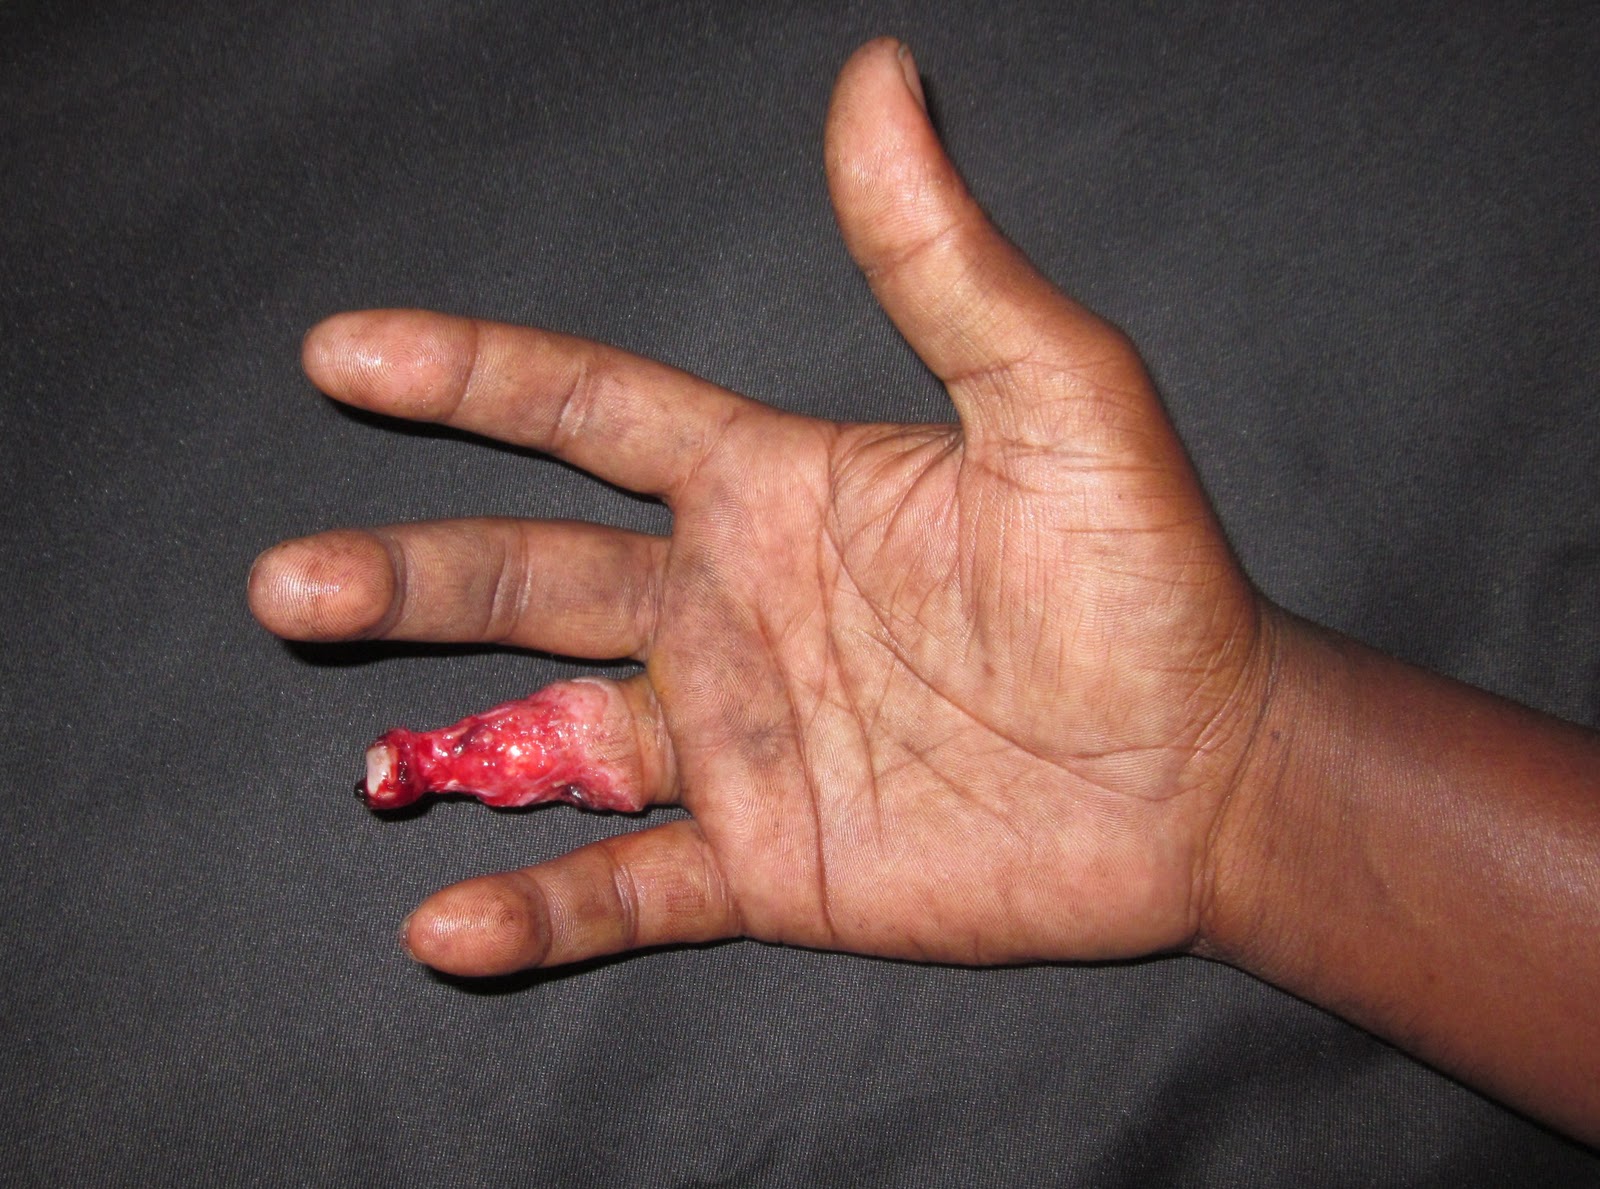 How Common Is Ring Avulsion Injuries